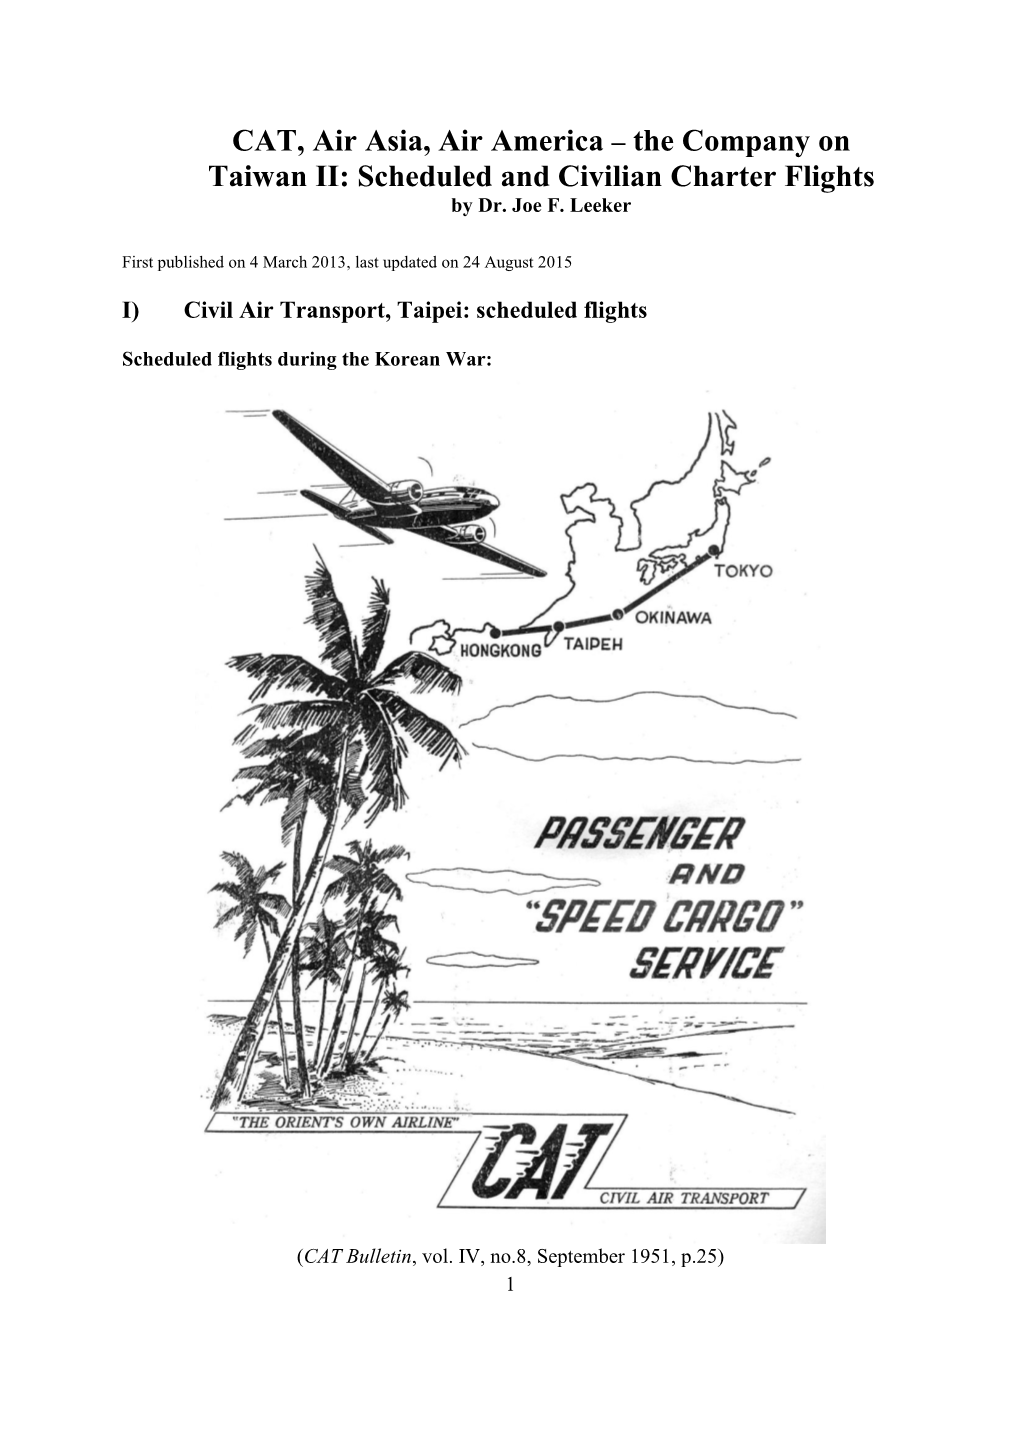 CAT, Air Asia, Air America – the Company on Taiwan II: Scheduled and Civilian Charter Flights by Dr